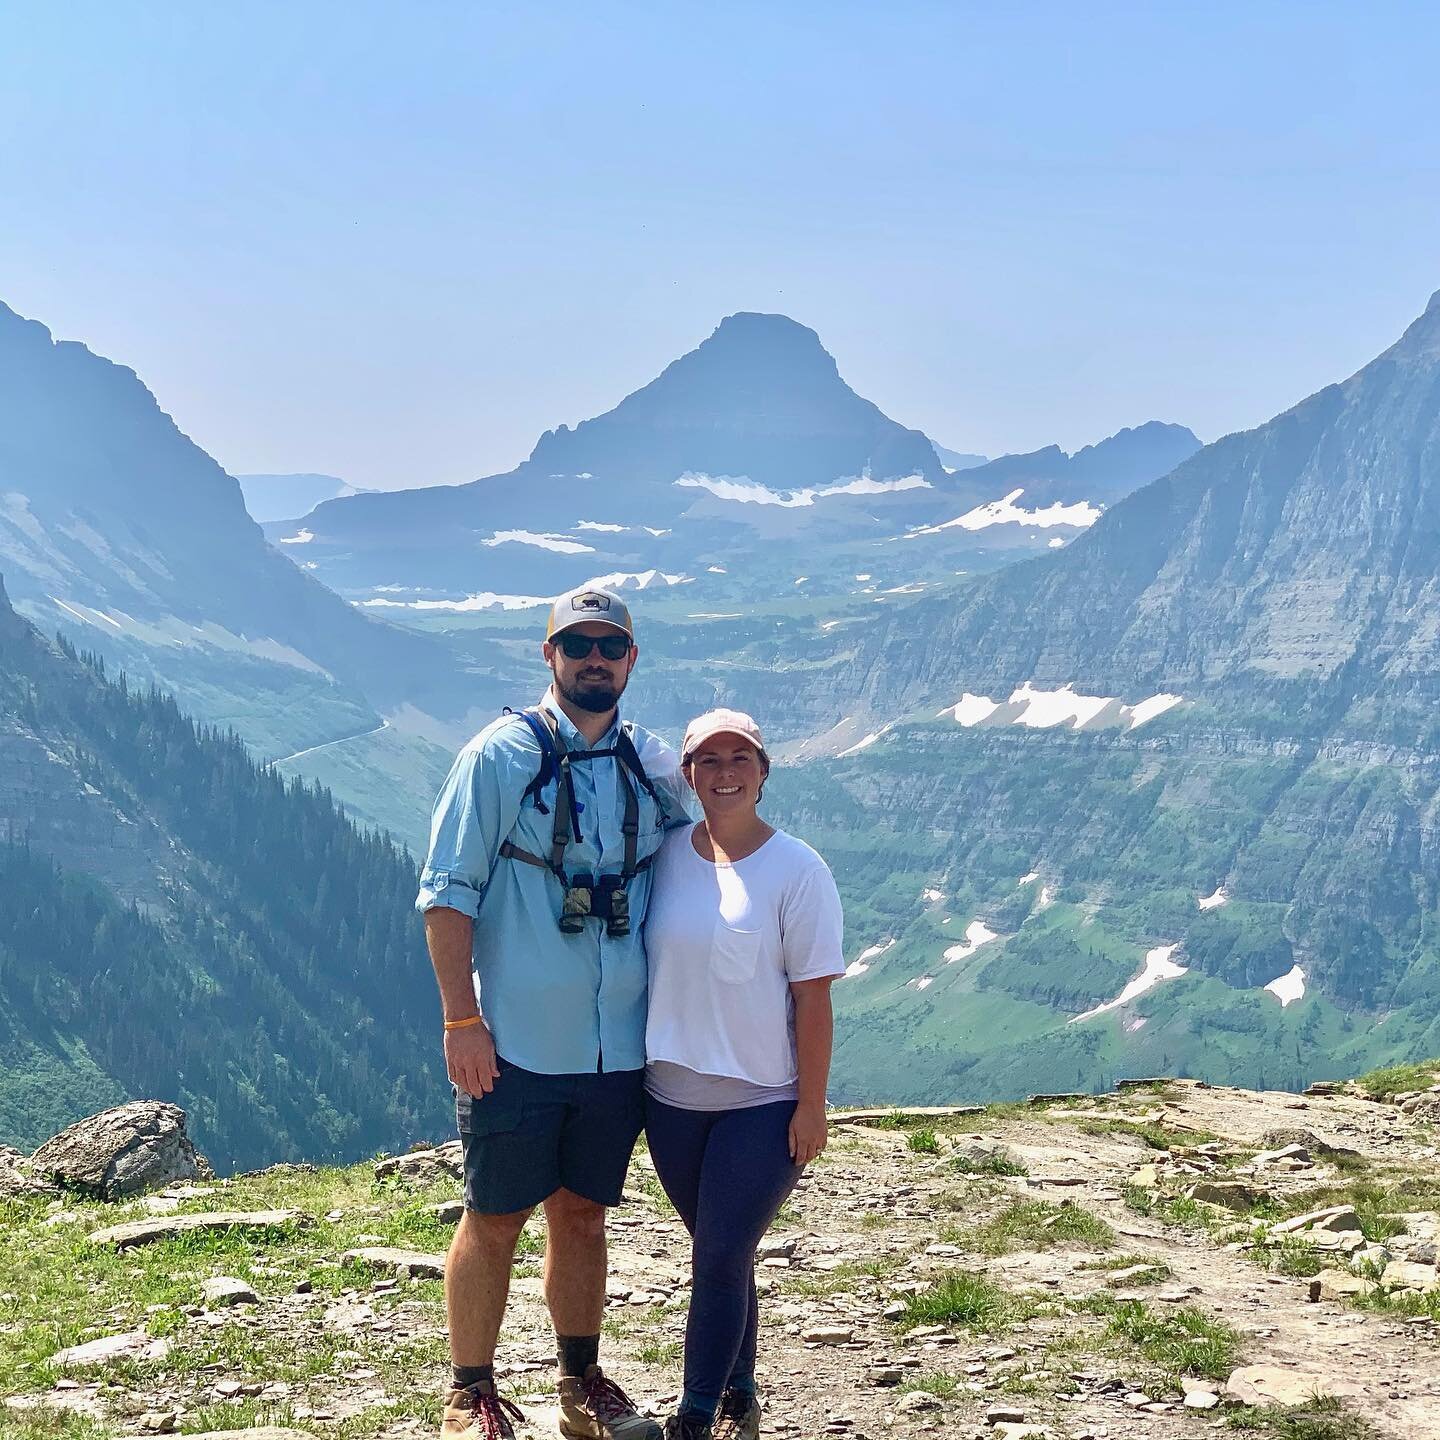 🏔we have the travel bug🏔

Last week we traveled to @glaciernps and had the best time with limited cell service📱and hiked to some pretty amazing views 😍 

Seriously it was best time and I can&rsquo;t wait to share more from our trip! 

Some fun fa